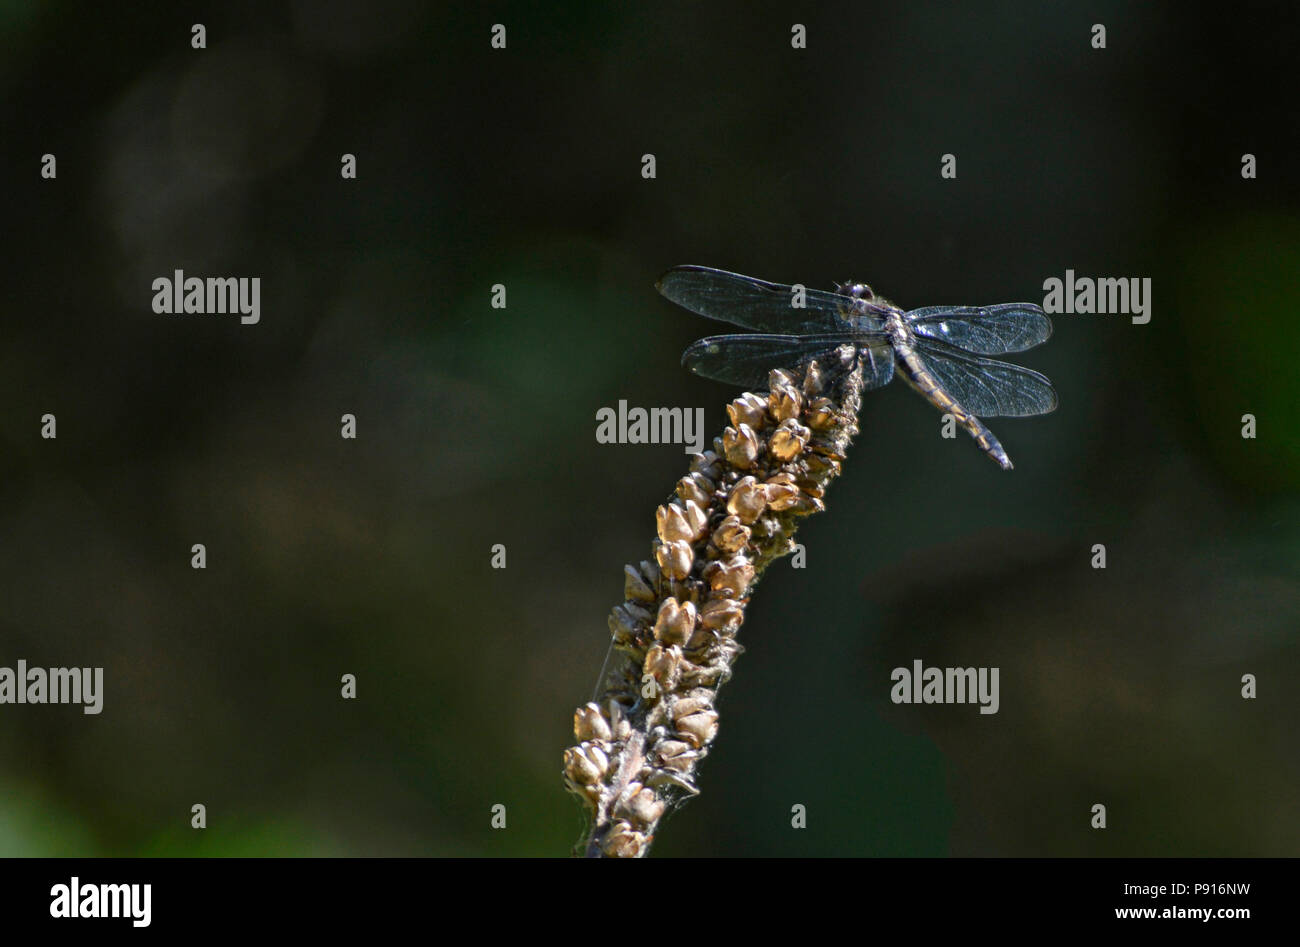 Close up of a Dragon Fly sitting on a stem. Stock Photo